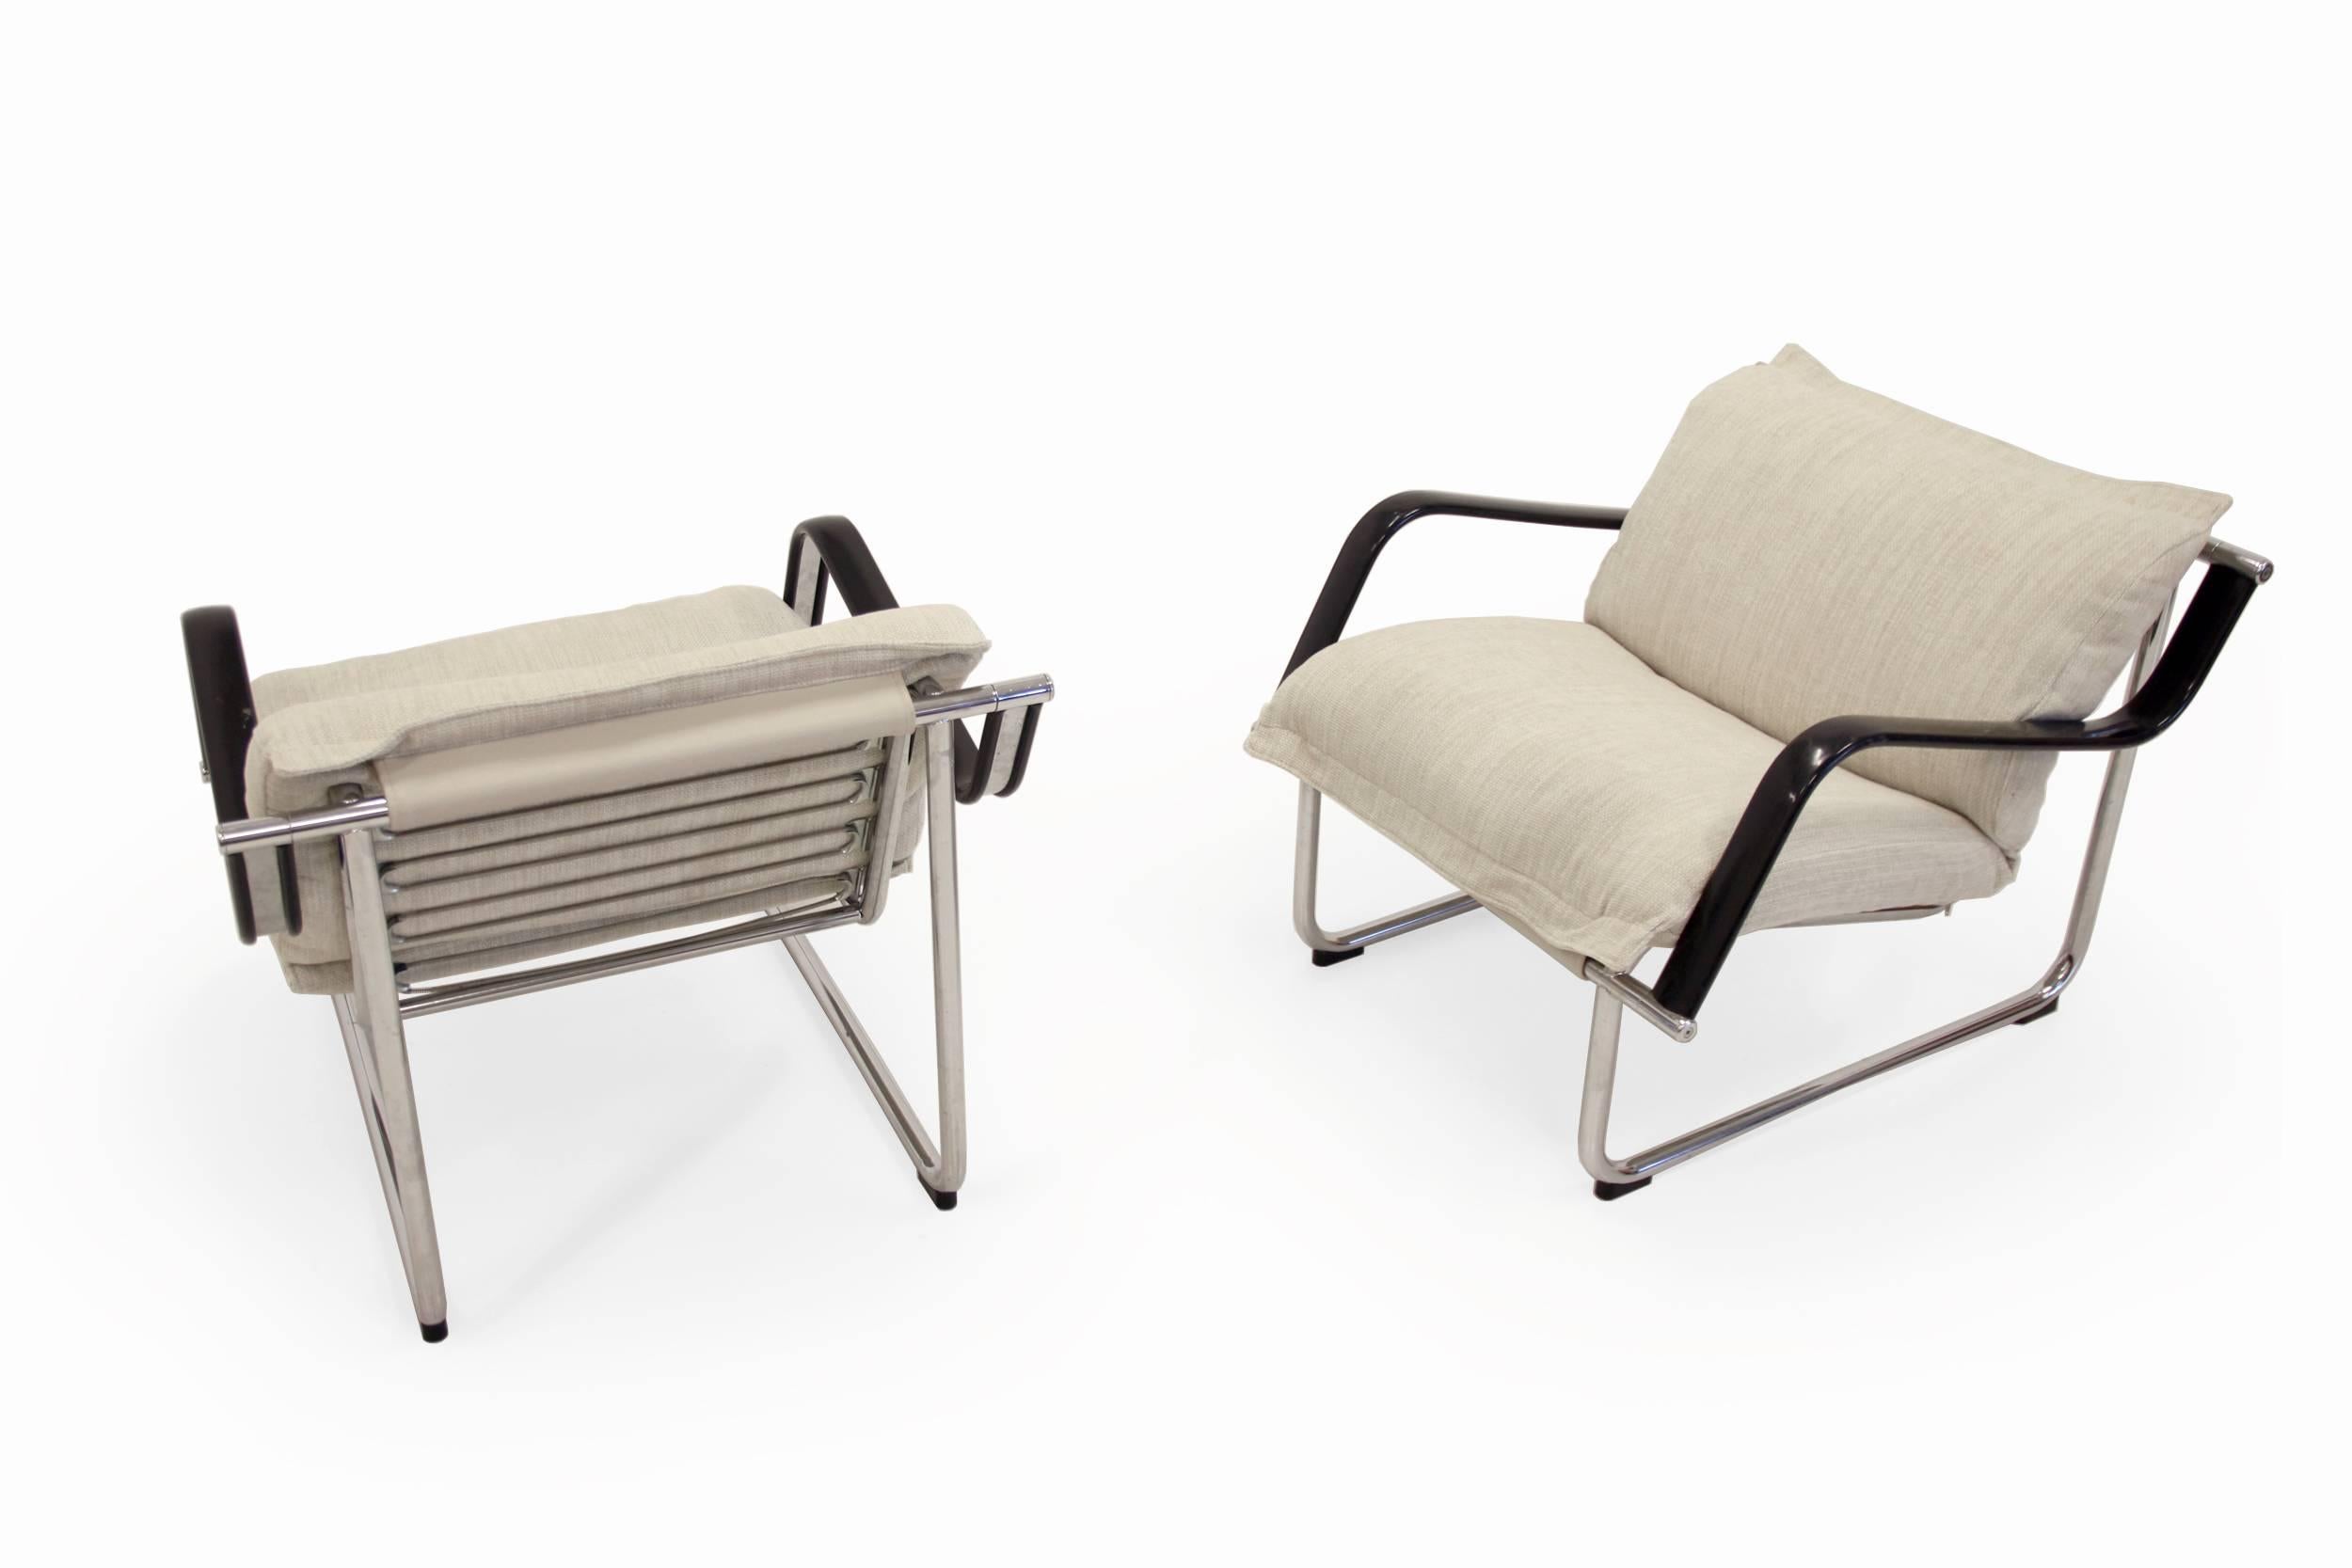 Modern and Minimalist pair of lounge chairs on a chrome steel frame with new pillows and upholstery in wool. This is model 'Remmi'. Designed by Yrjö Kukkapuroand manufactured in Finland by Avarte. Both chairs have a sturdy framework with some minor